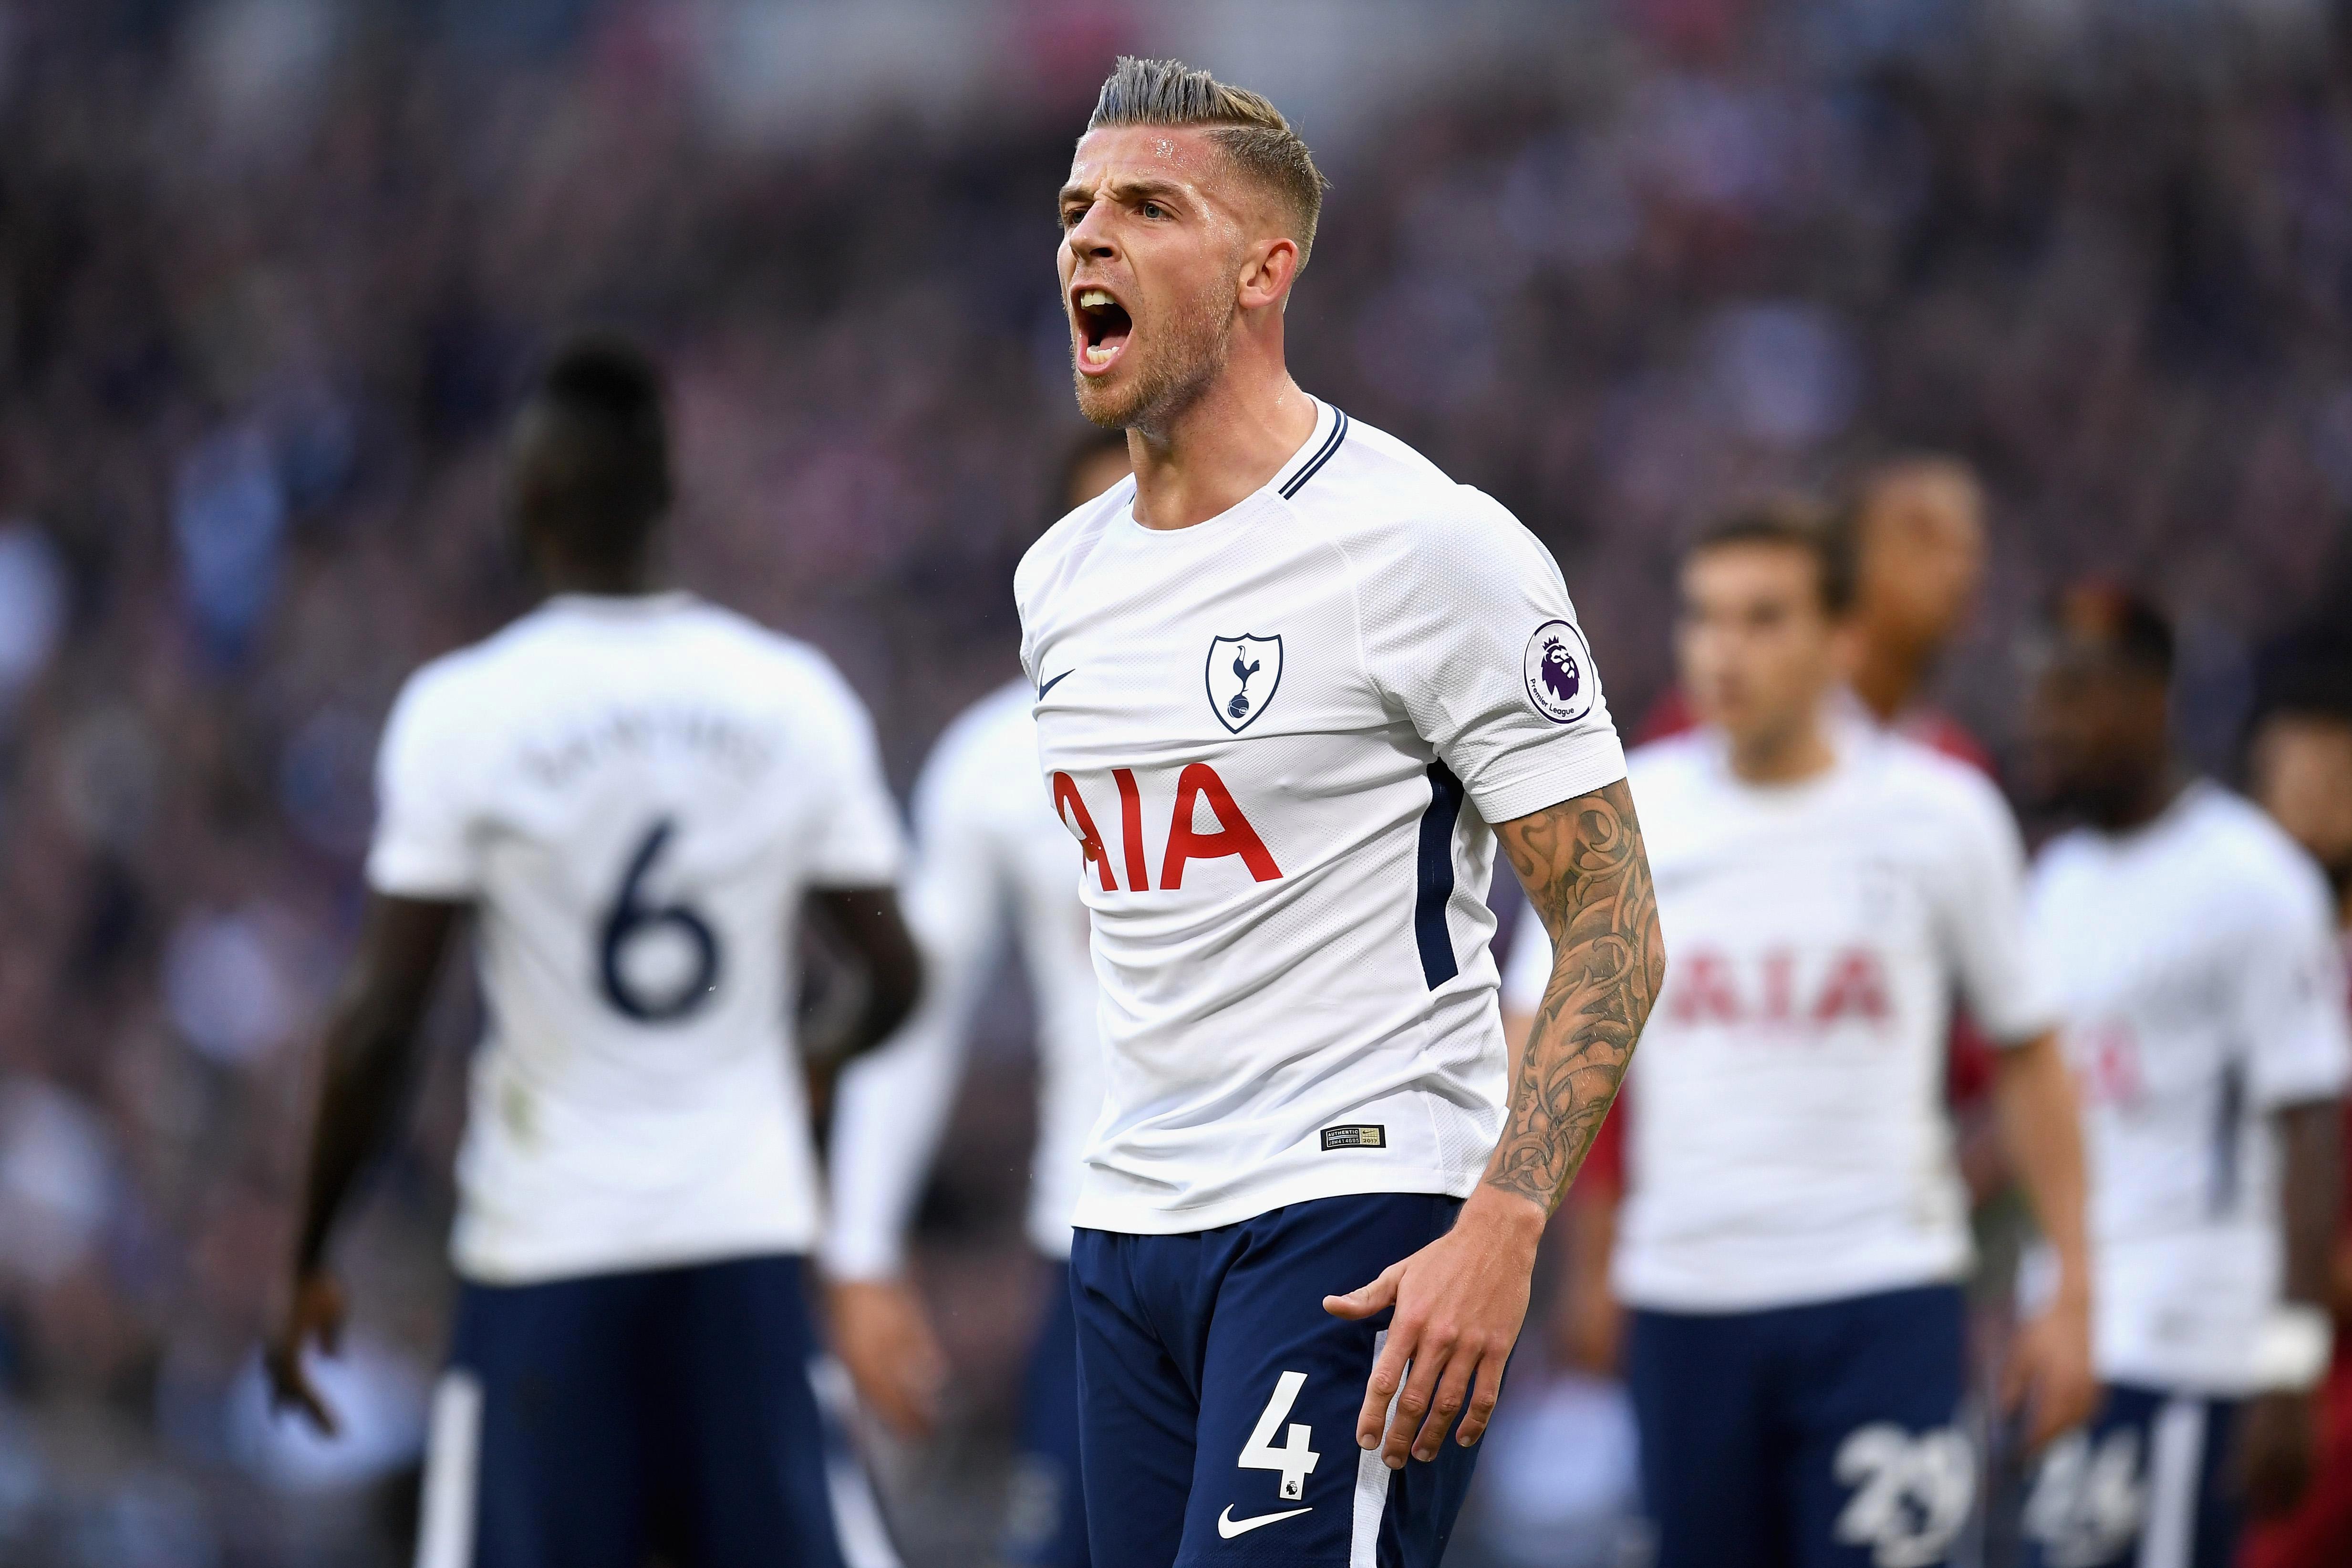 Manchester United should complete Toby Alderweireld transfer instead of Harry Maguire, says Rio Ferdinand